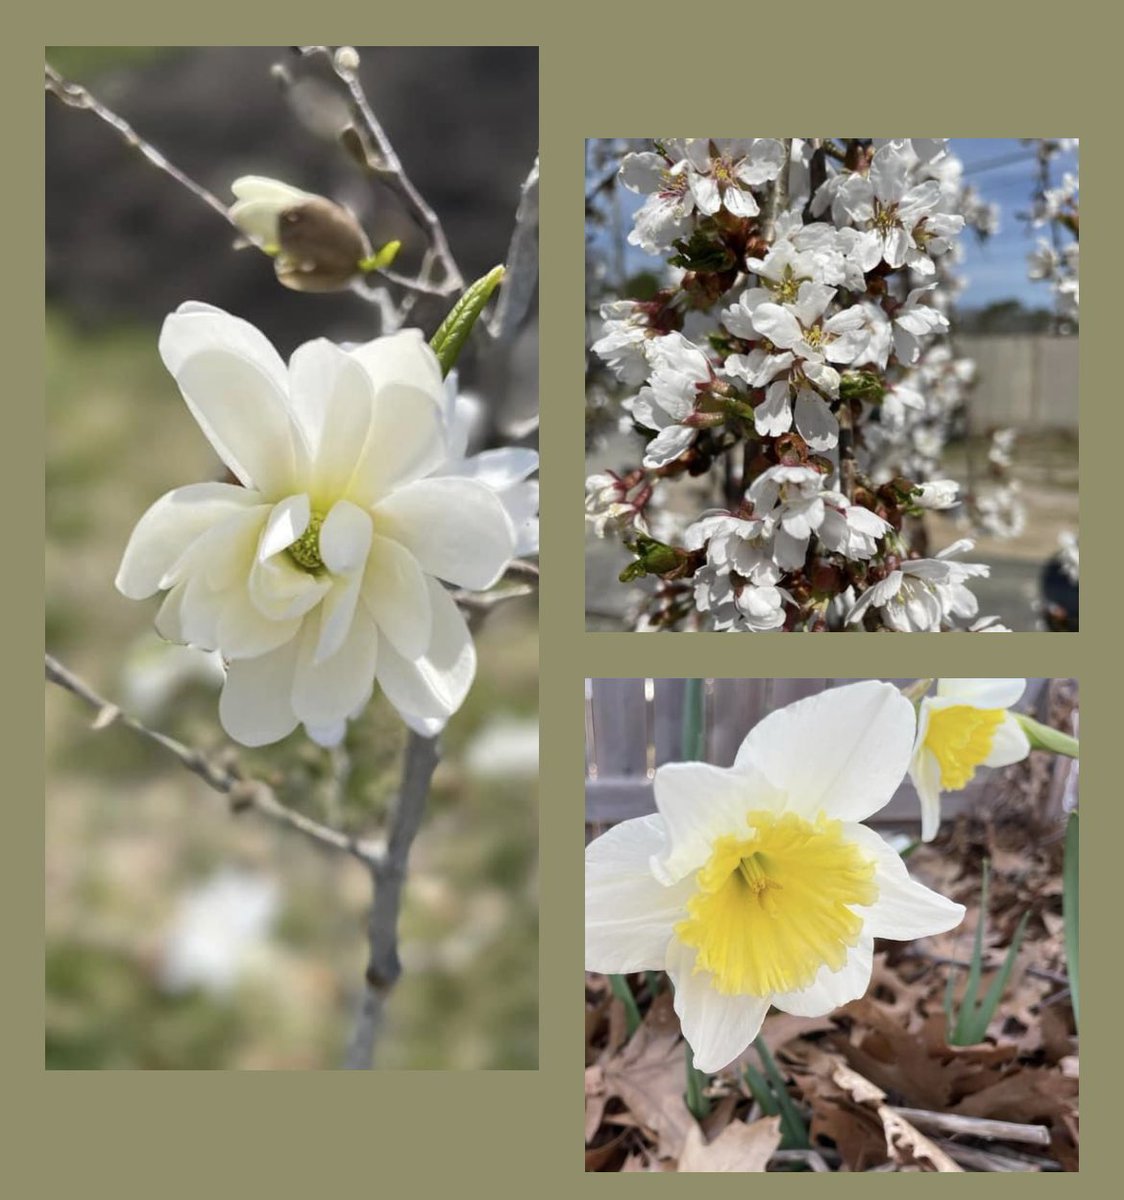 It’s Happening! 🌸
Star Magnolia, Snow Fountains Cherry, Daffodil

#spring2023 #springblooms #cherryblossom #daffodils #gardening #garden #flowers #floweringtrees #growsomething #hiddengardens #capecod #hiddengardenscapecod #hiddengarden #gardendecor #plantsmakepeoplehappy